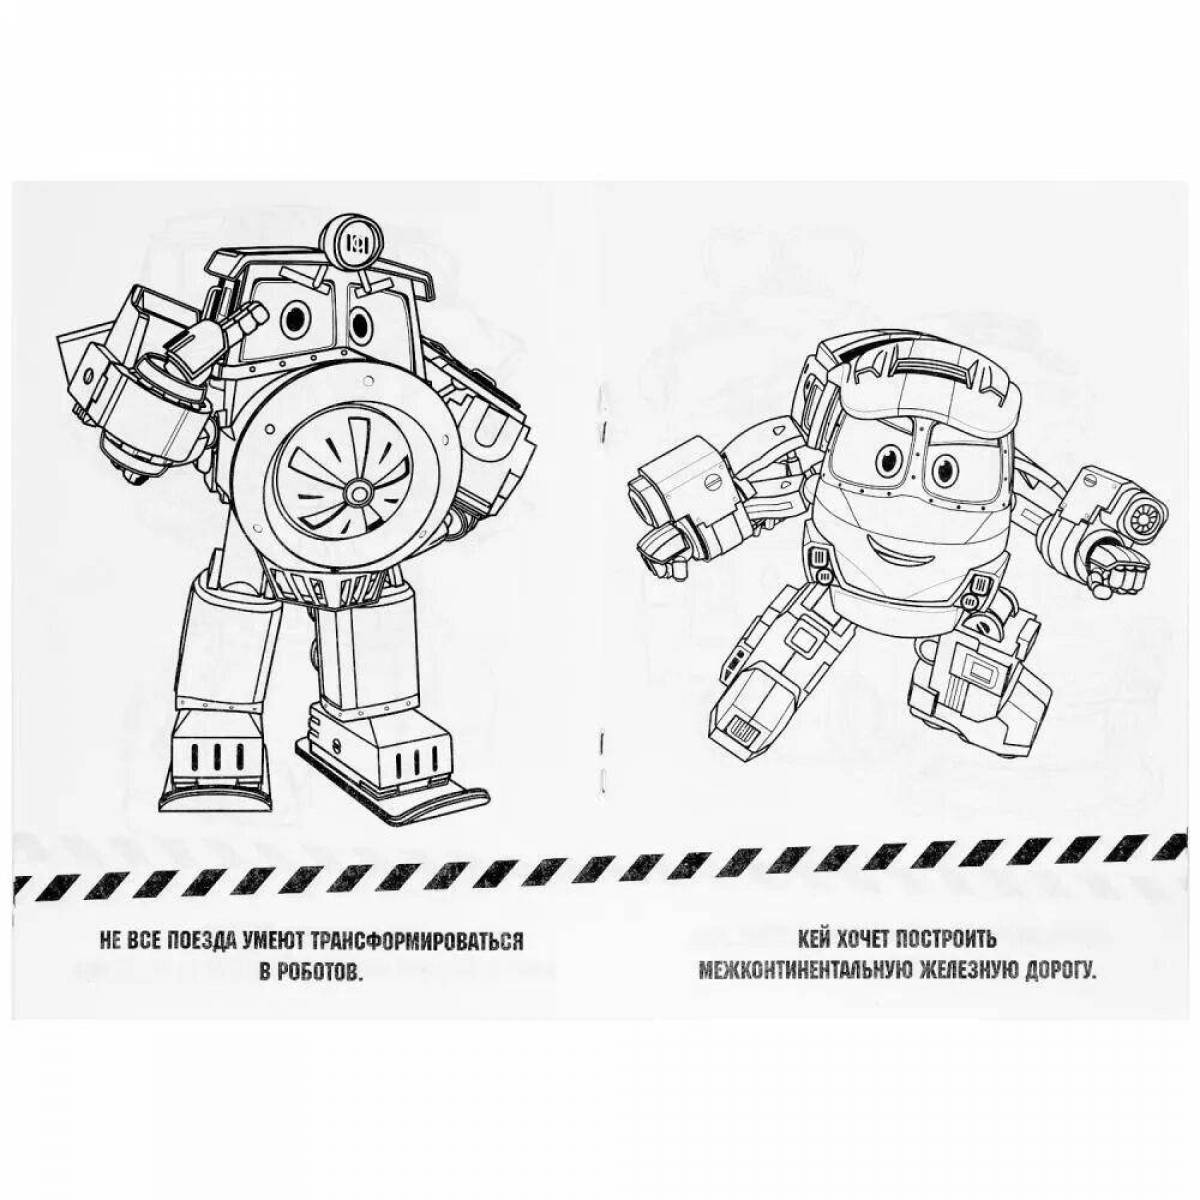 Victor's colorful train robots coloring book